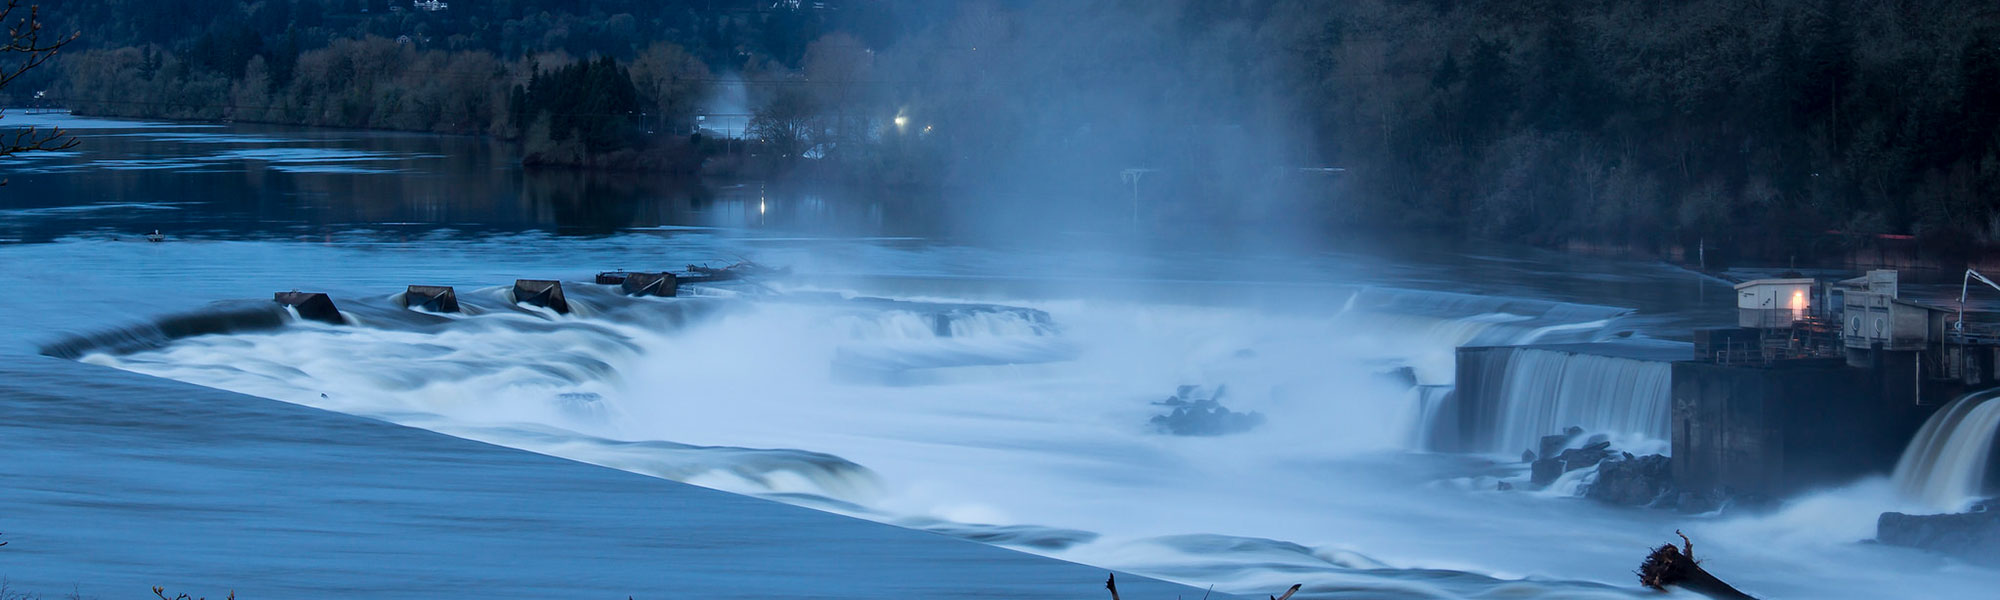 Willamette falls at dusk with moon visible and mist